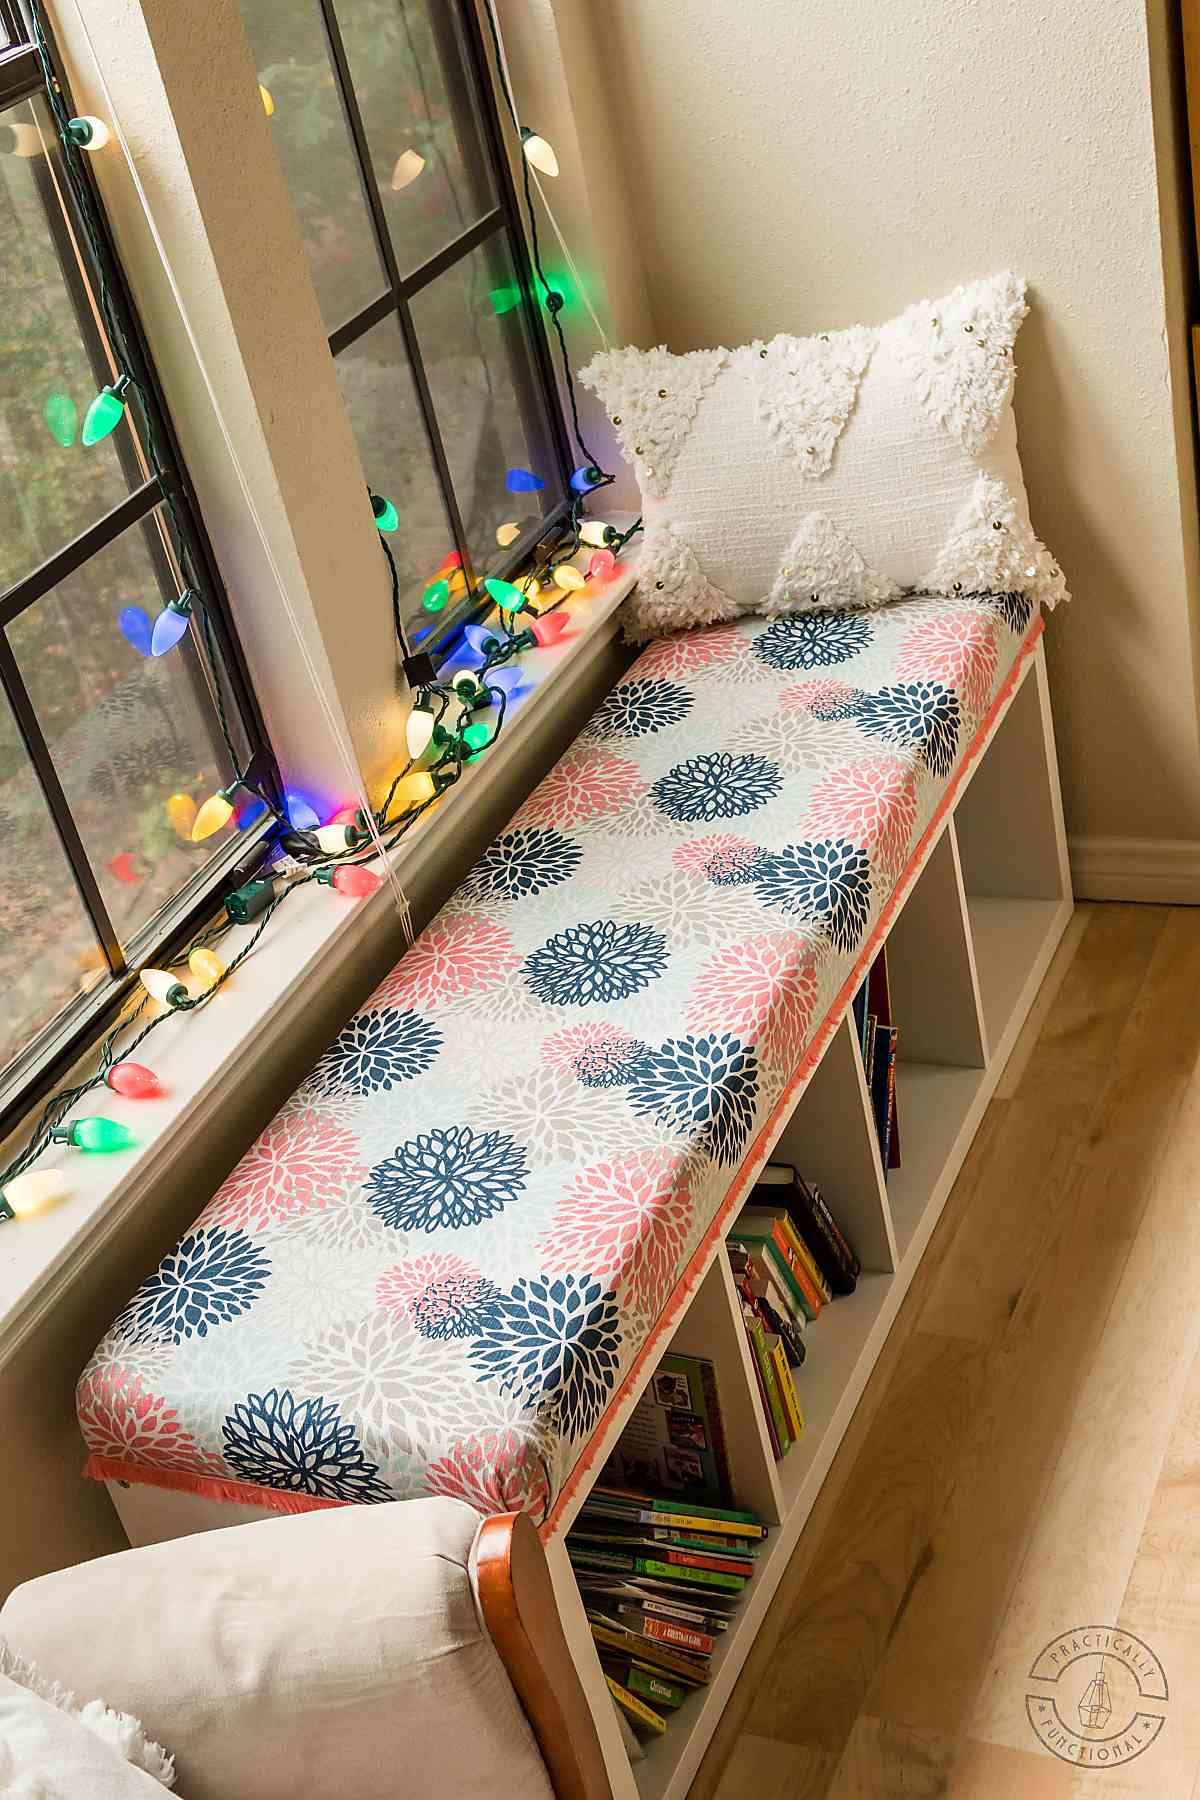 window seat made with a diy bench seat cushion on top of ikea kallax cubby storage unit